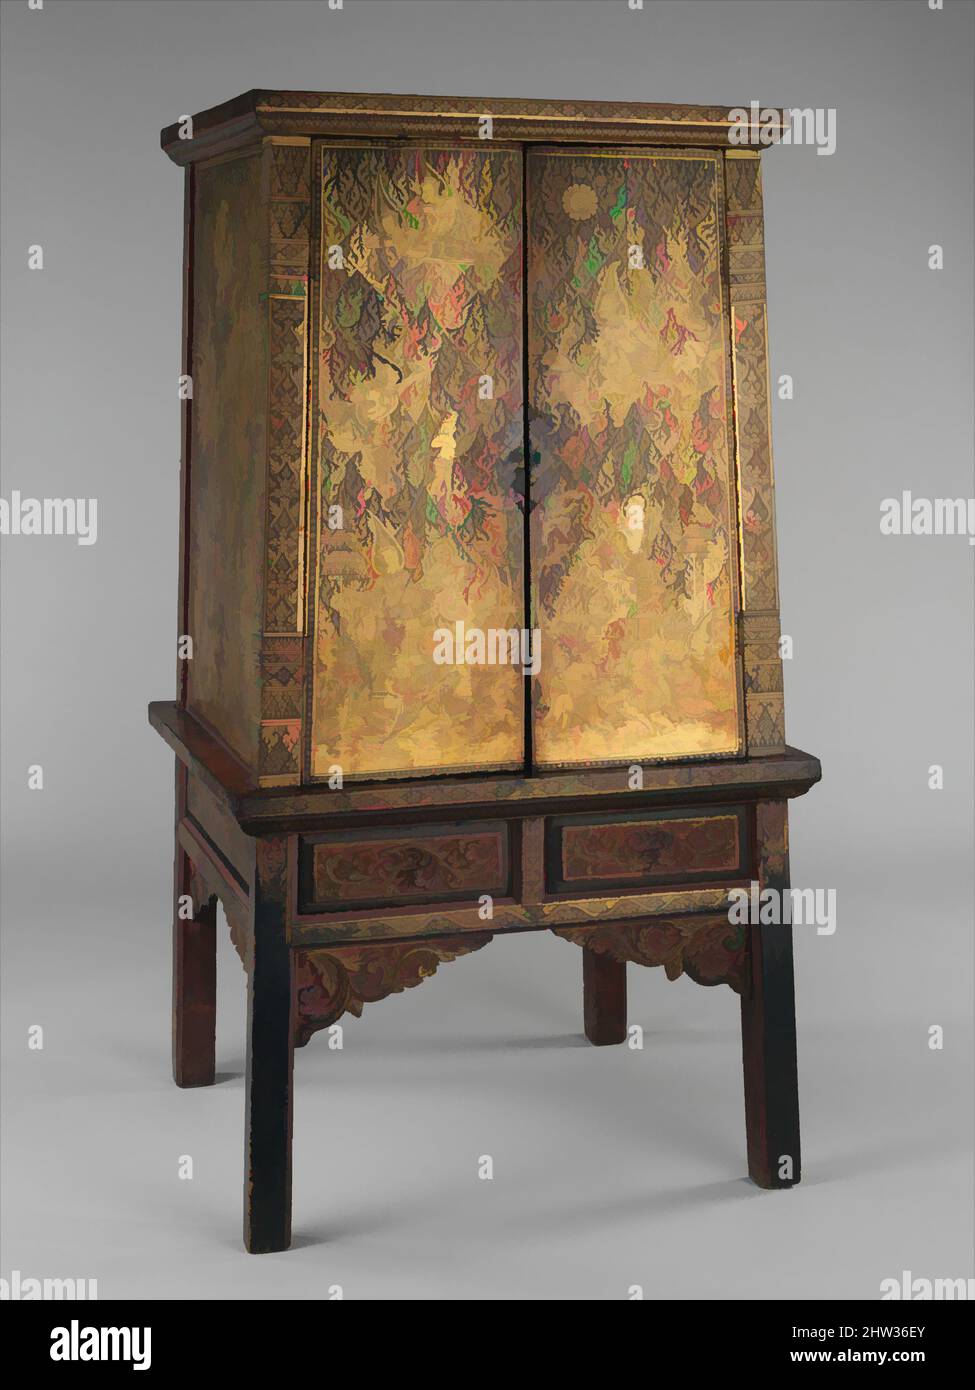 Art inspired by Manuscript Storage Cabinet, Ratanakosin period, late 18th–early 19th century, Thailand (Bangkok), Wood with gold and lacquer, H. approx. 62 1/2 in. (158.8 cm); W. 34 1/16 in. (86.5 cm); D. 31 1/8 in. (79.1 cm), Furniture, Cabinets of this type were traditionally gifted, Classic works modernized by Artotop with a splash of modernity. Shapes, color and value, eye-catching visual impact on art. Emotions through freedom of artworks in a contemporary way. A timeless message pursuing a wildly creative new direction. Artists turning to the digital medium and creating the Artotop NFT Stock Photo